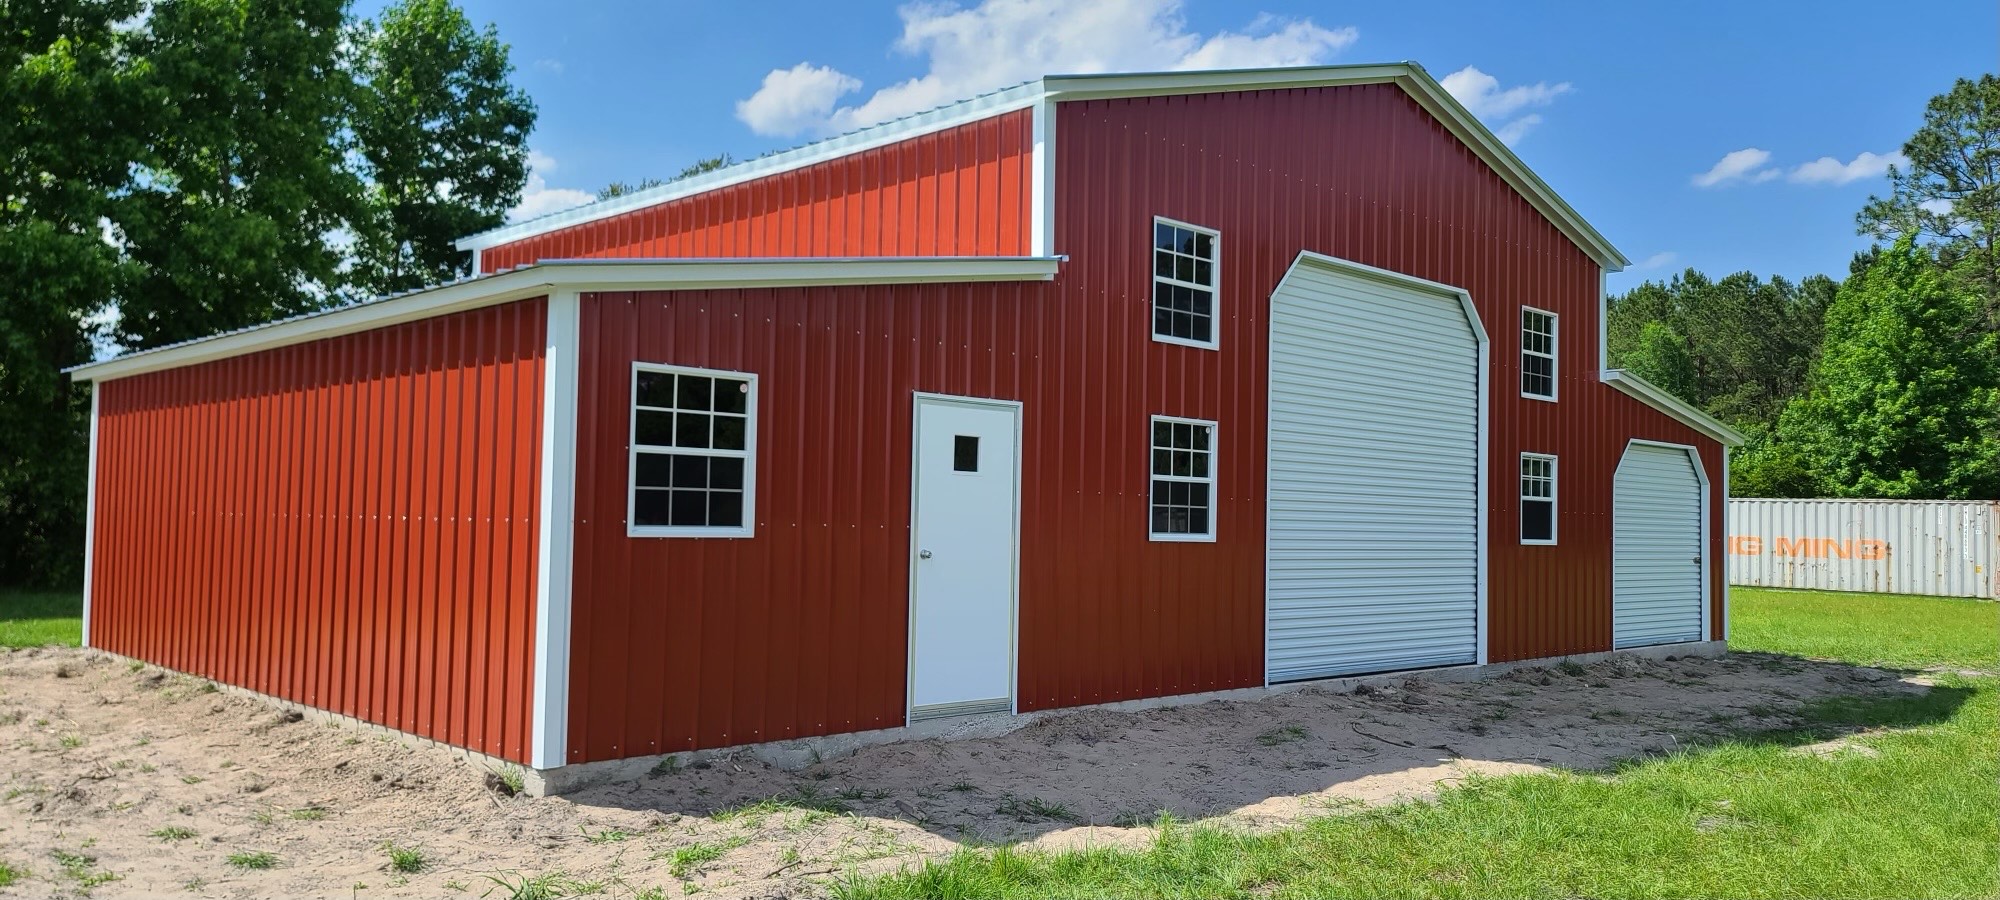 A fully customized red metal barn